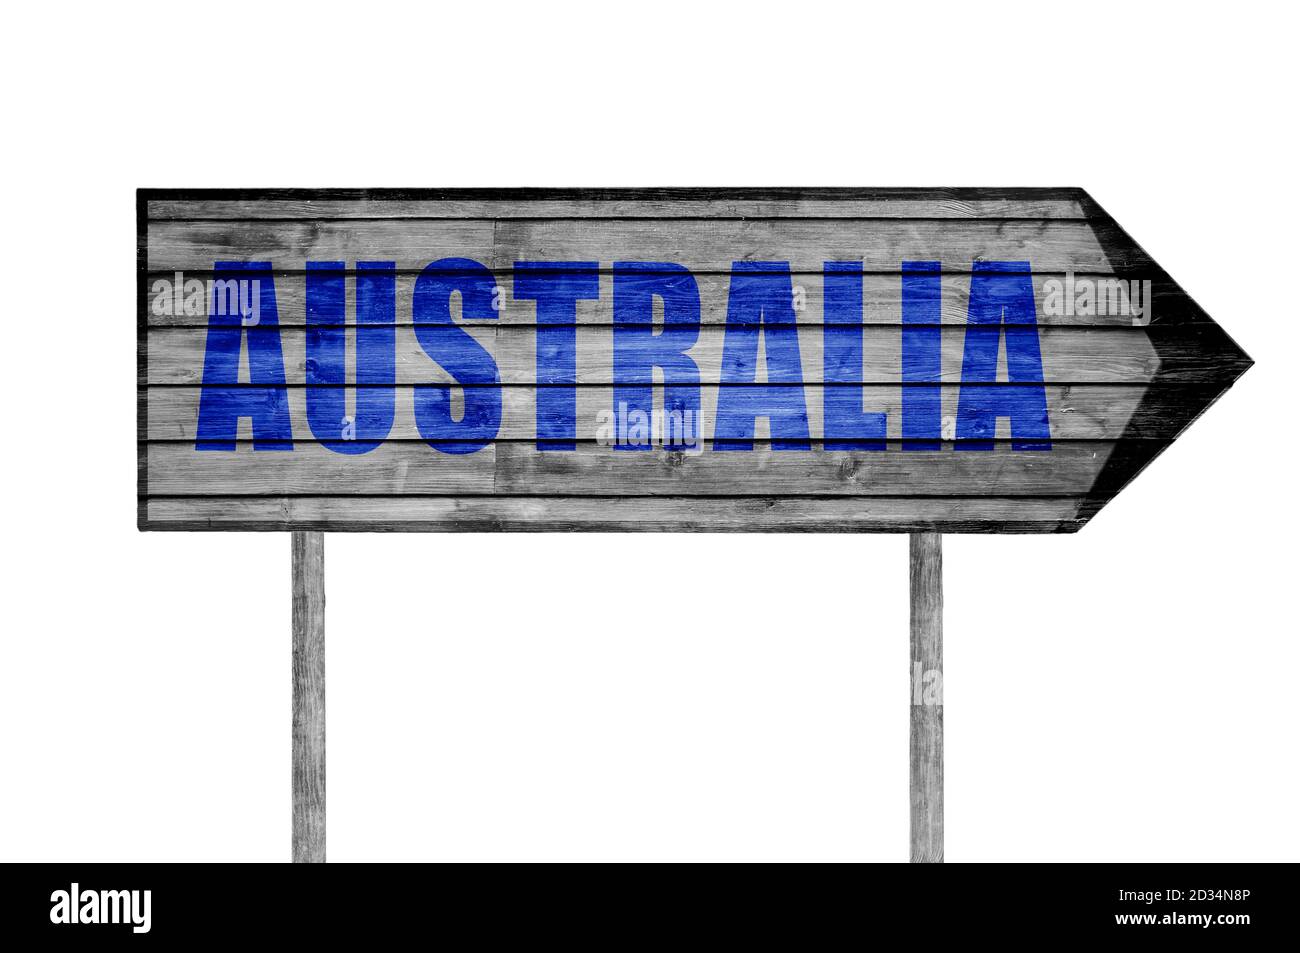 Australia wooden sign with beach background Stock Photo